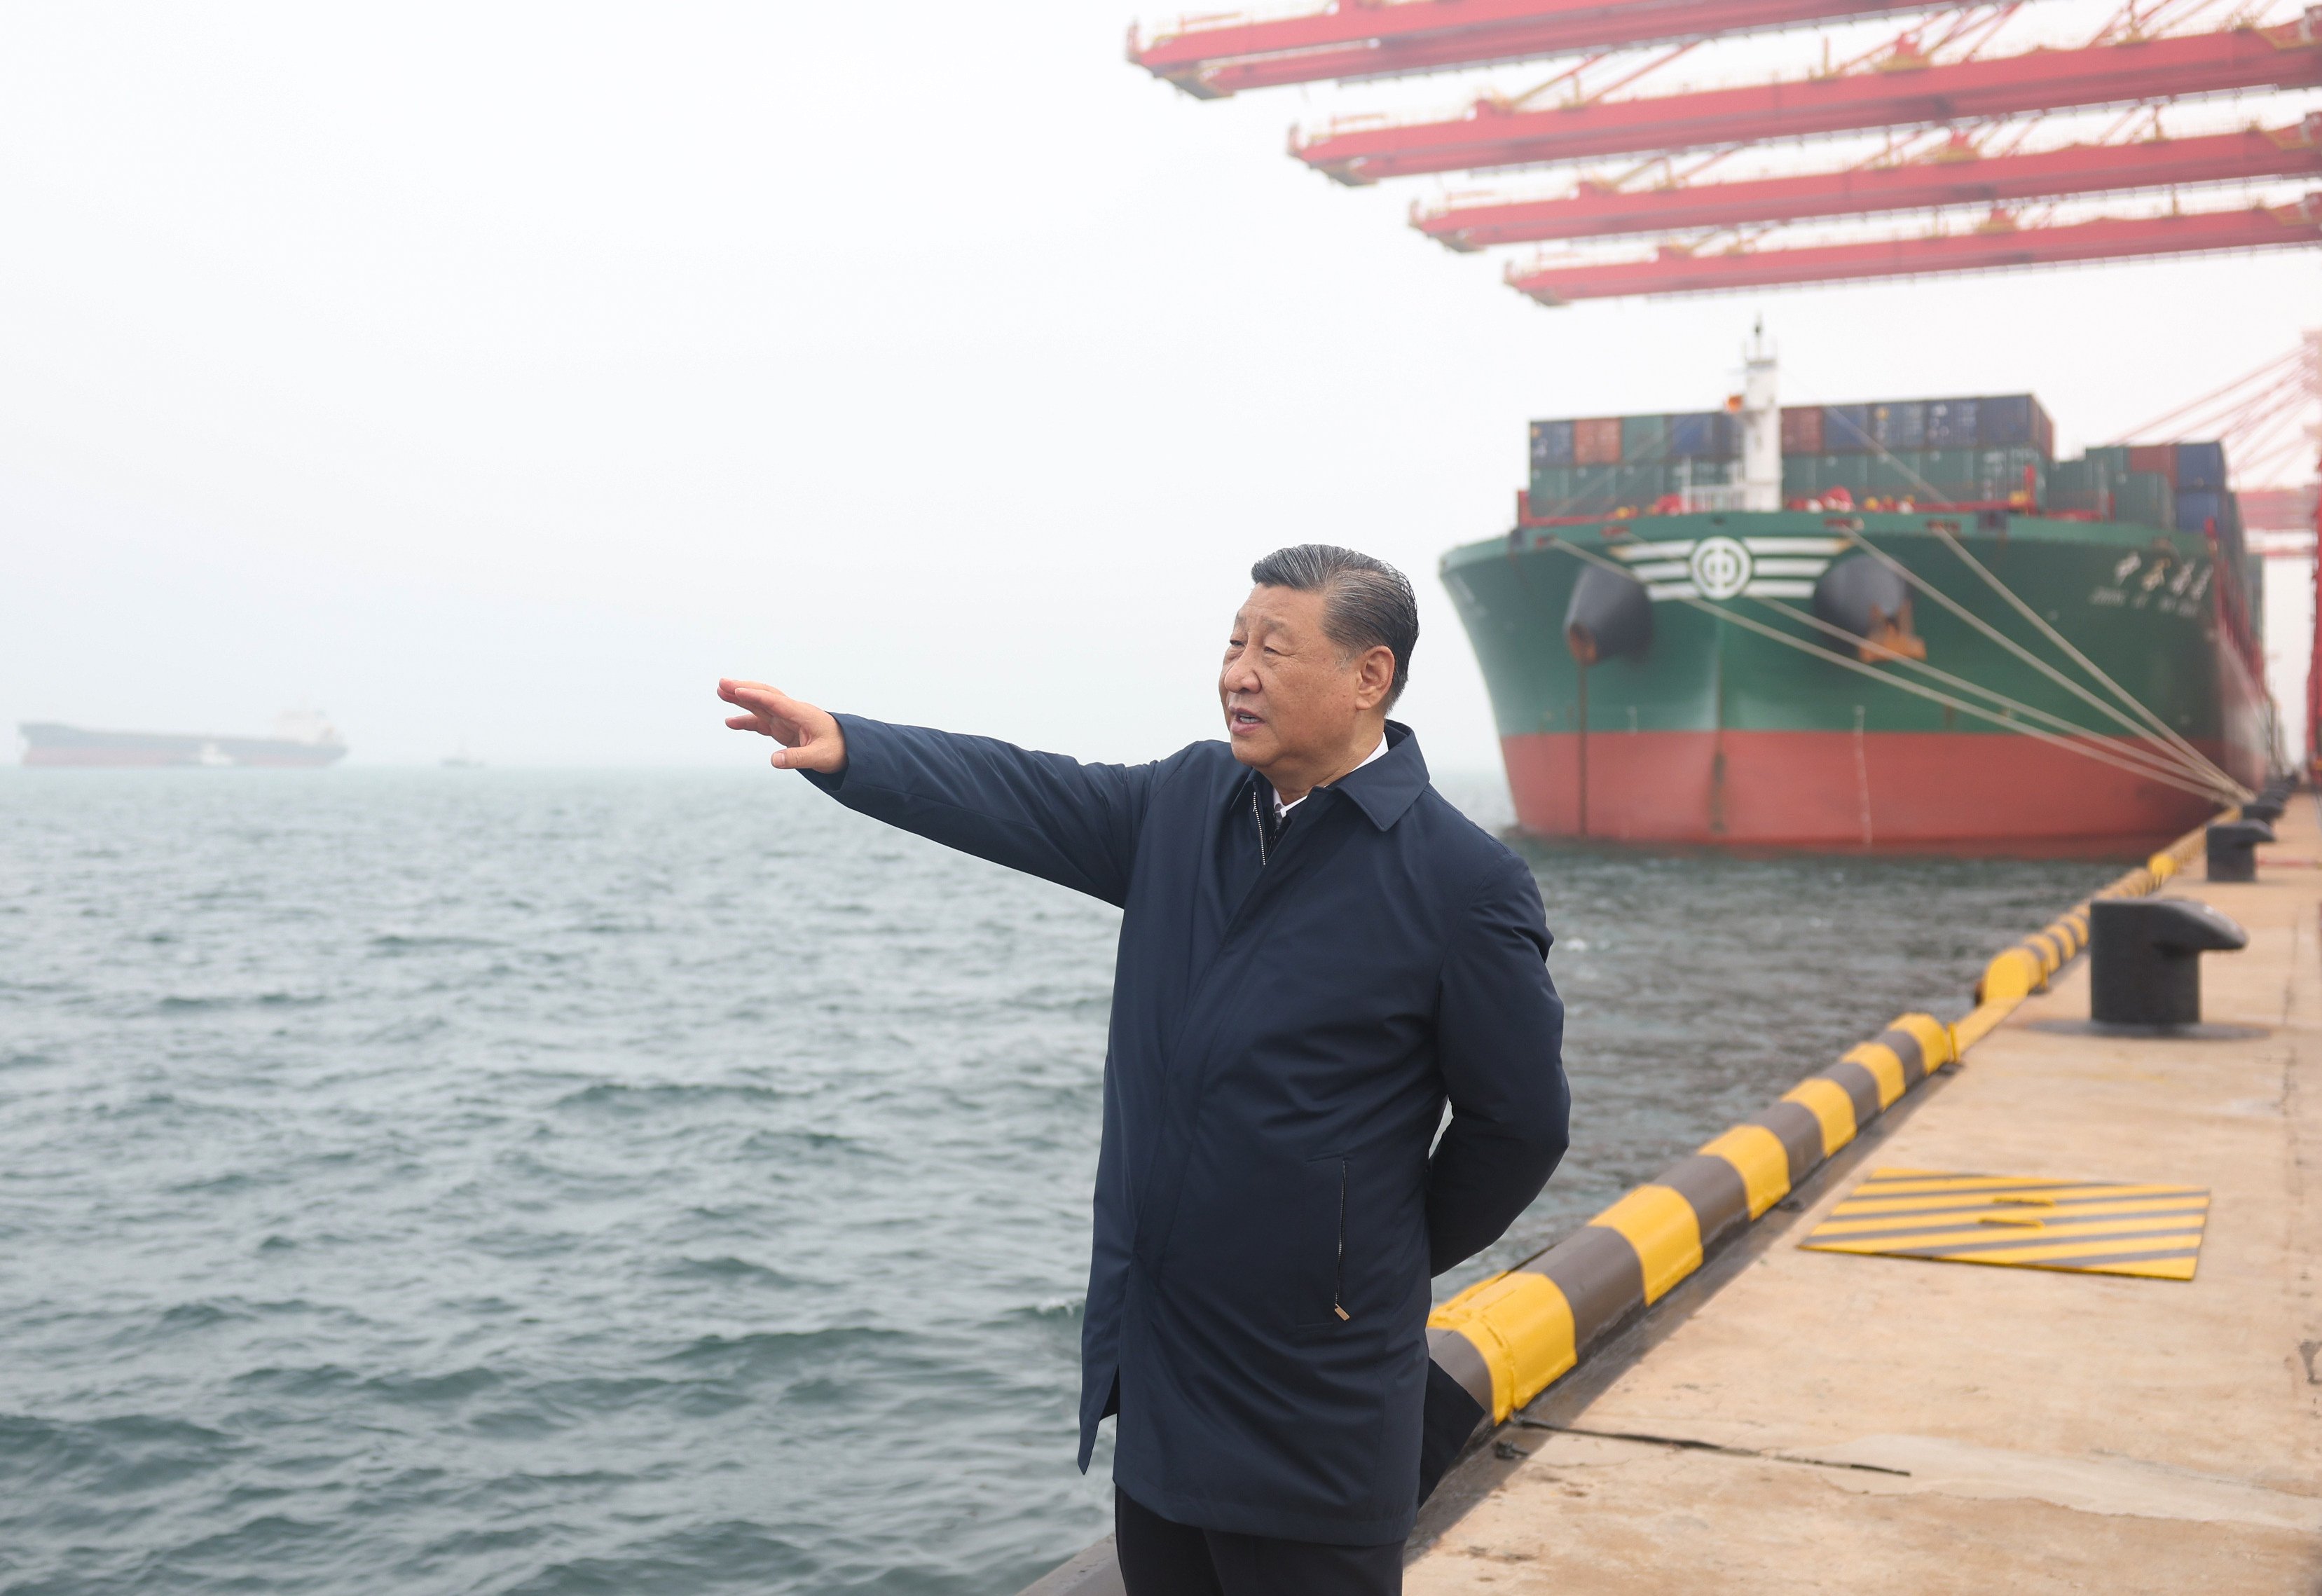 President Xi Jinping visits the port of Rizhao in Shandong province on Thursday. He also stopped in Jinan, meeting business leaders there. Photo: Xinhua